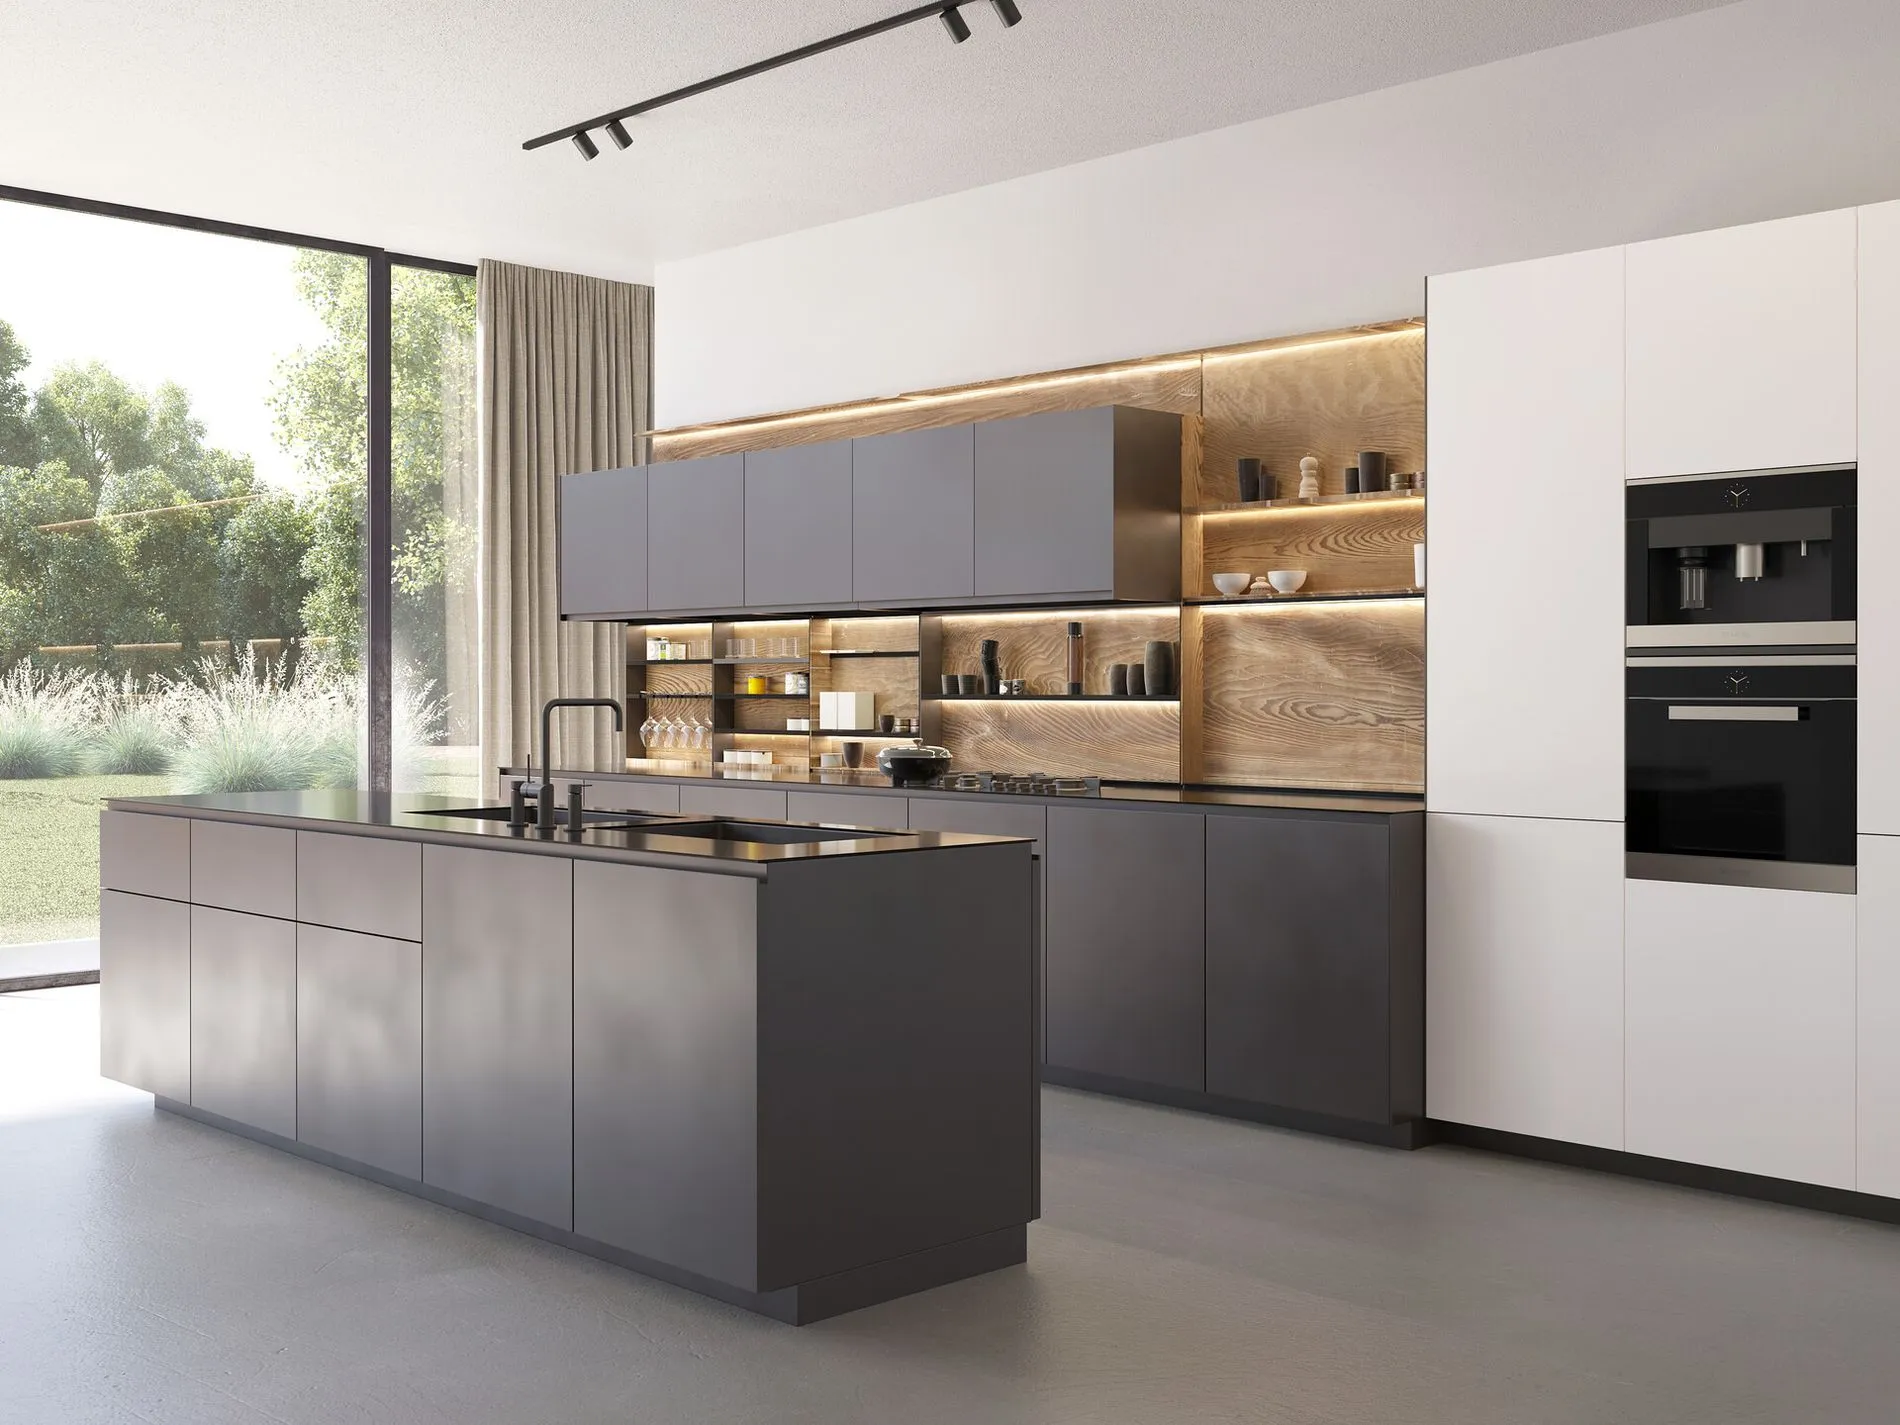 3d render of a modern contemporary minimalist kitchen with satin anthracite and white cabinets, wood backsplash and concrete floor.jpg